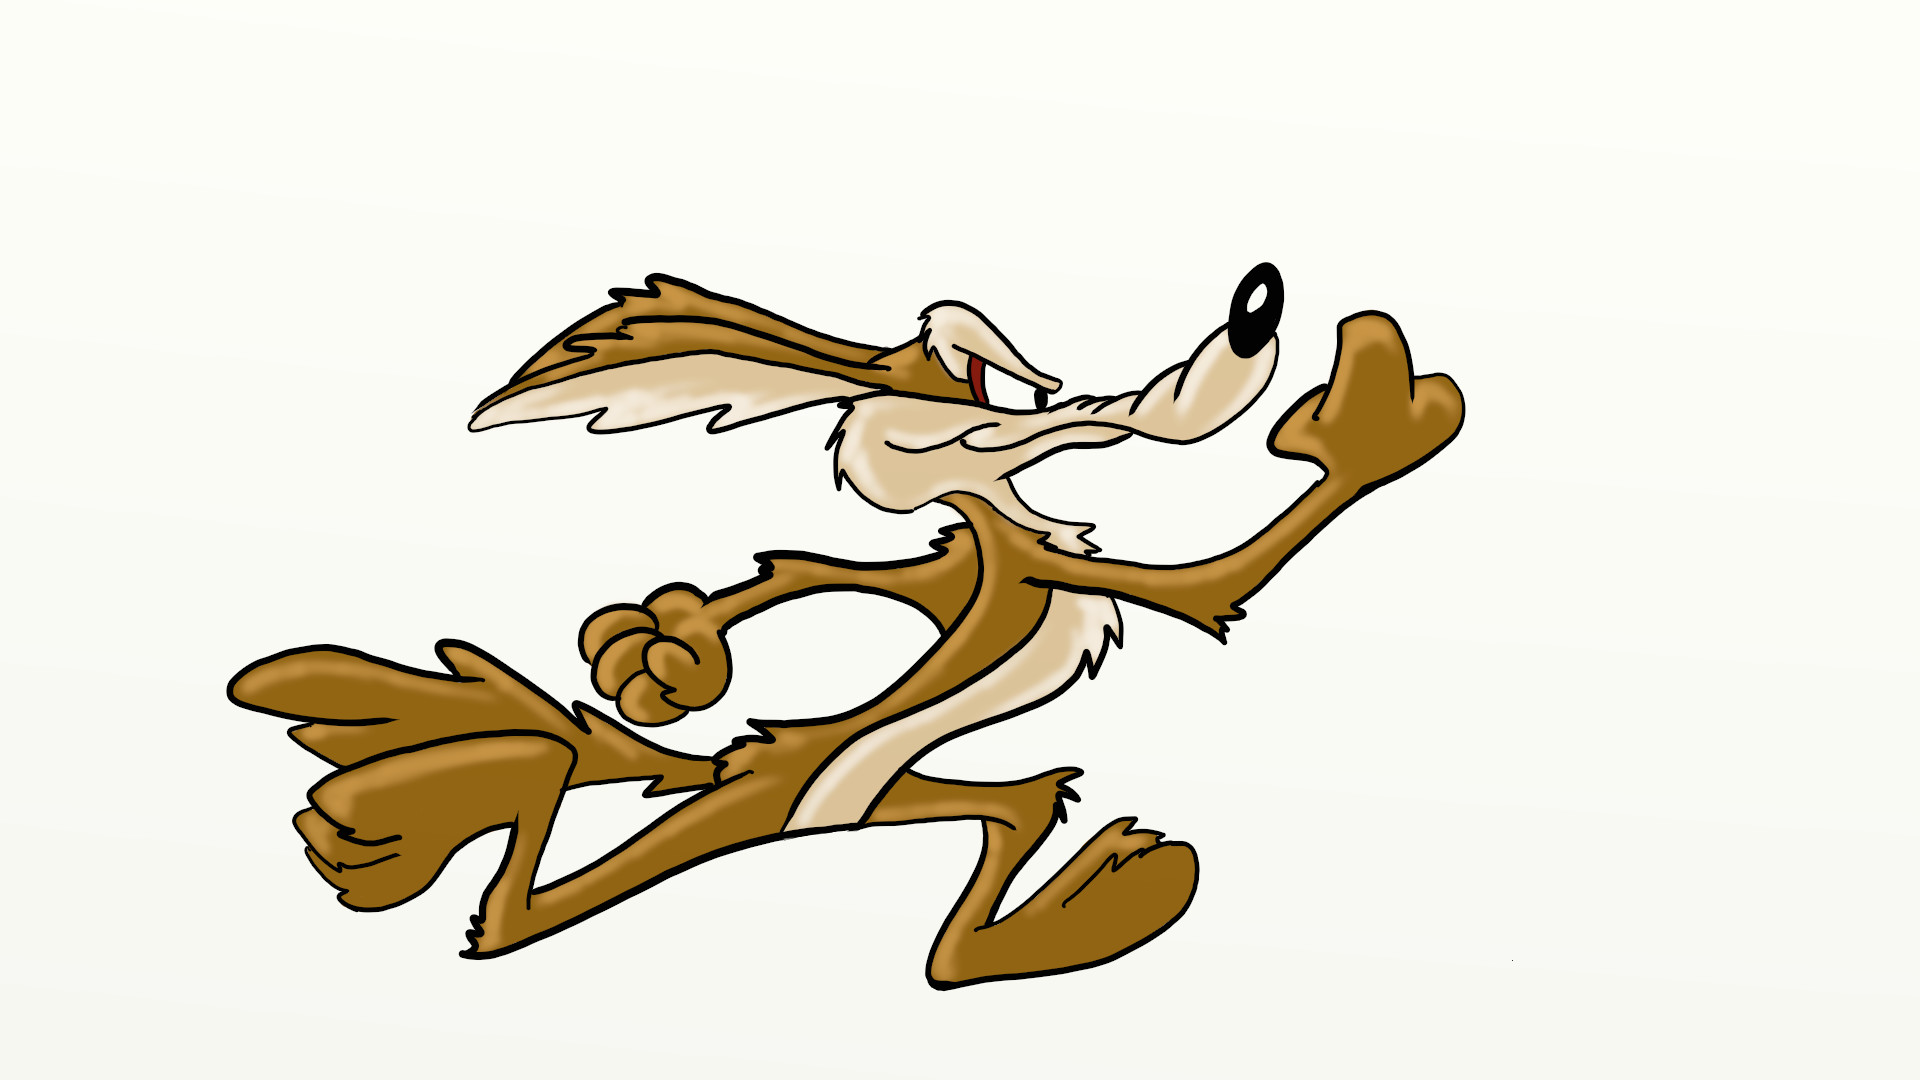 ArtStation - Drawing Wile E Coyote